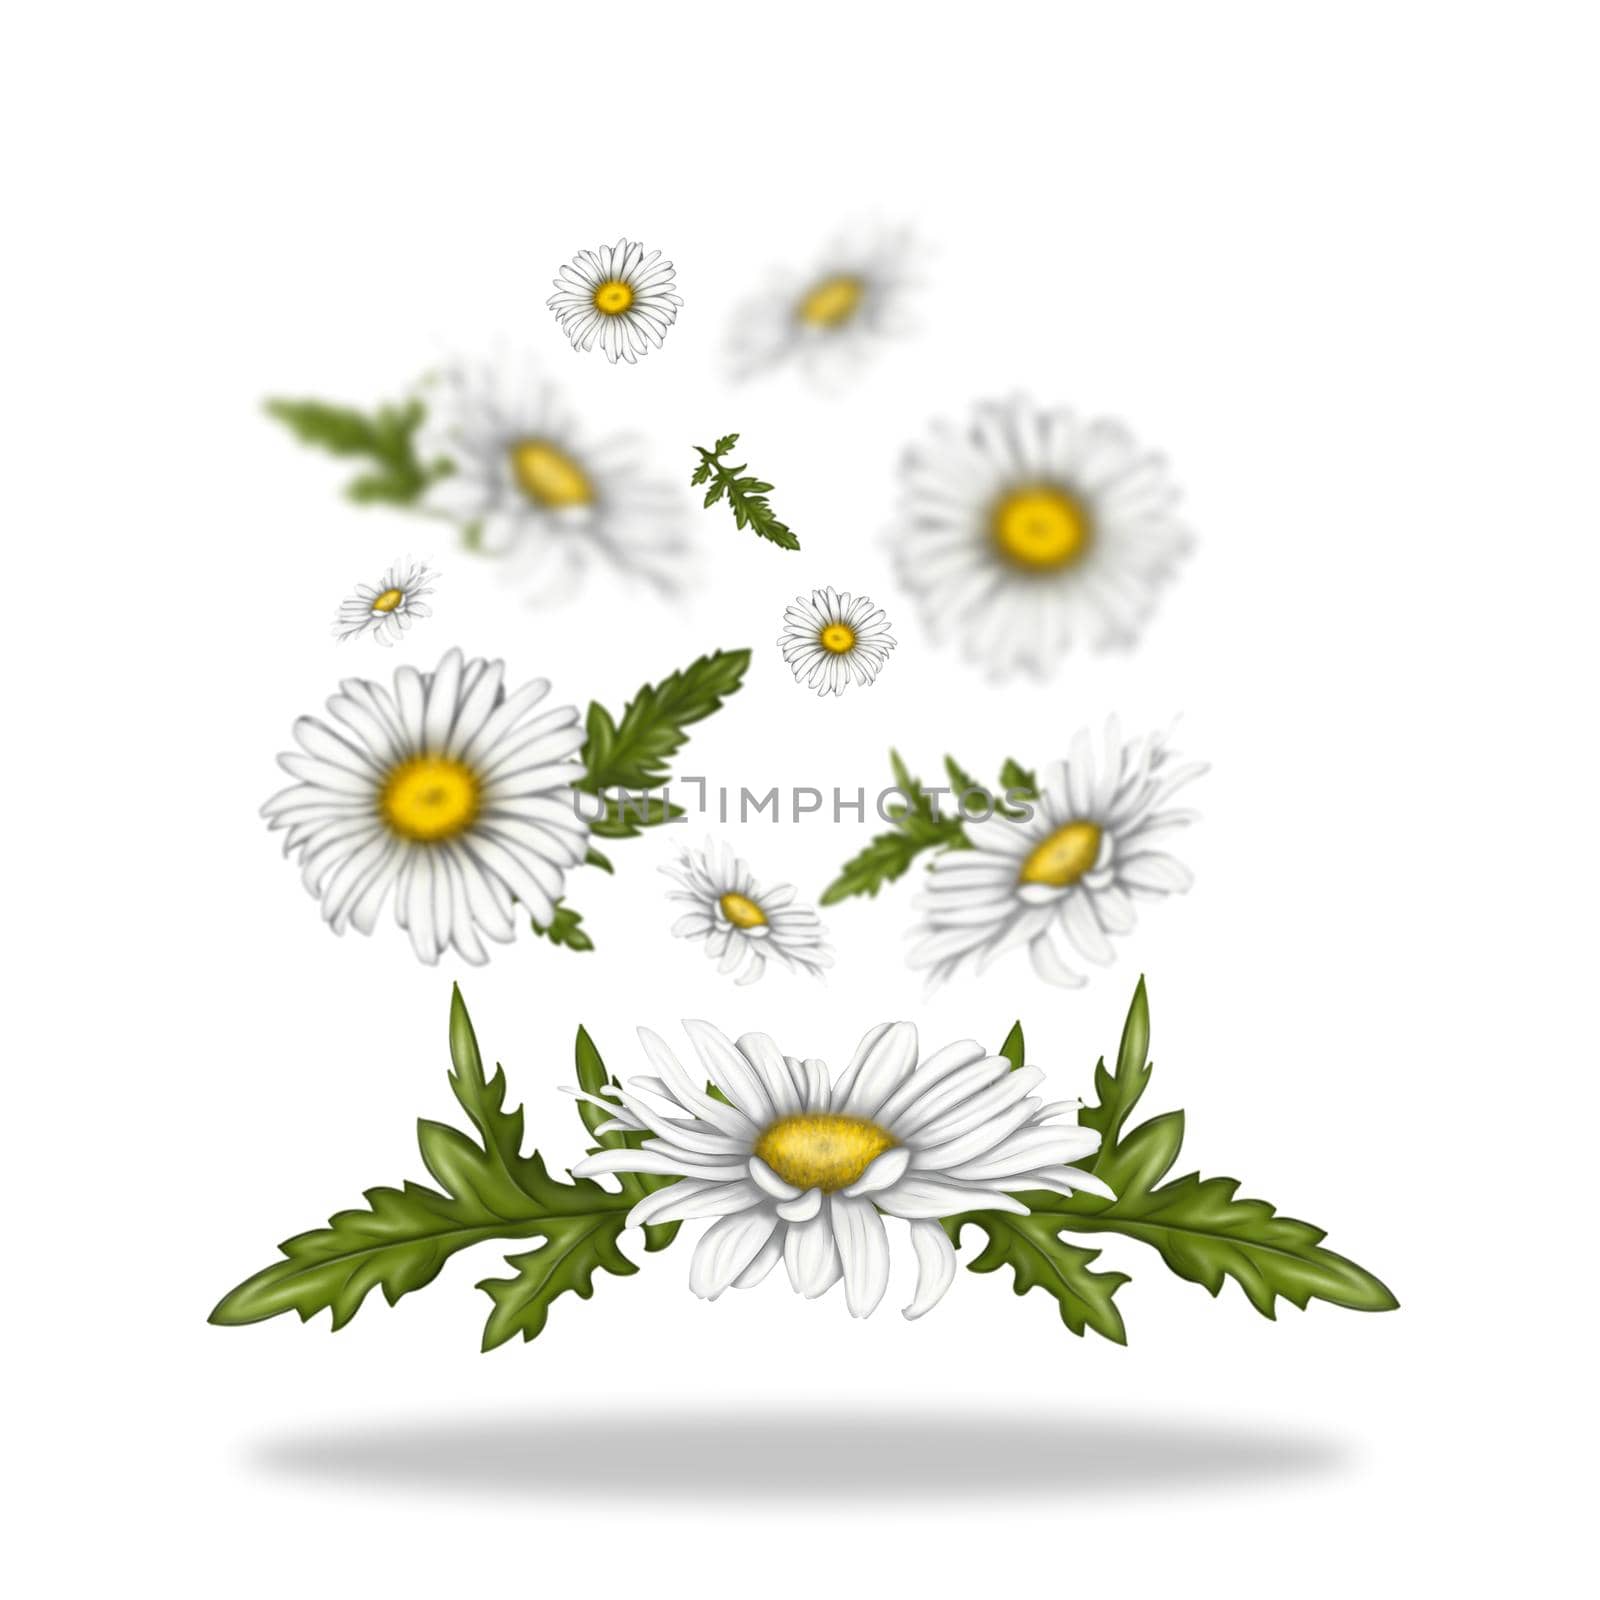 Illustration of chamomile flowers. Flowers float freely in space. White flowers on a light background. Summer